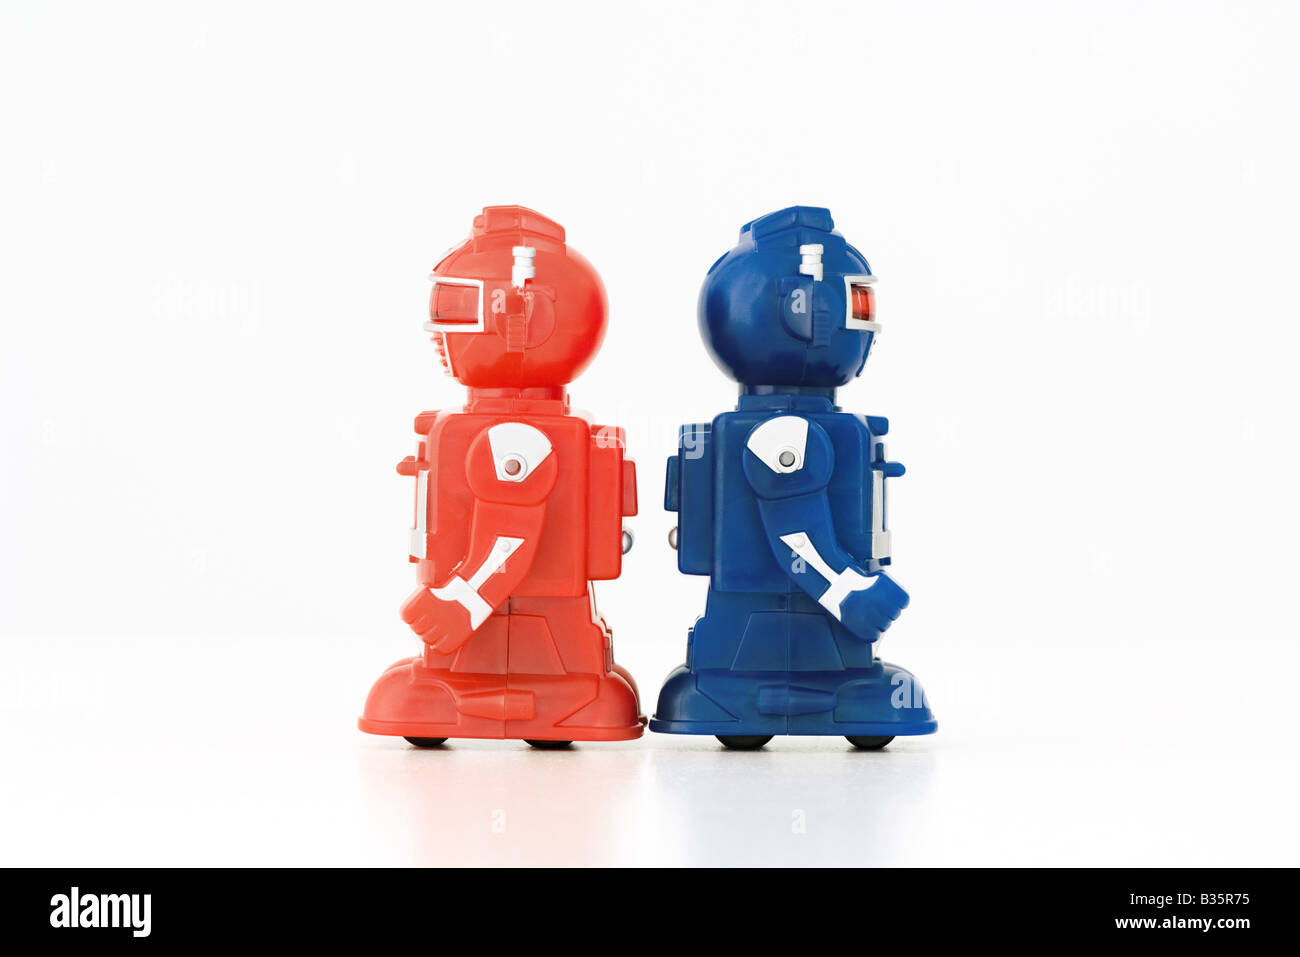 Robots Jouets standing back to back, side view Banque D'Images